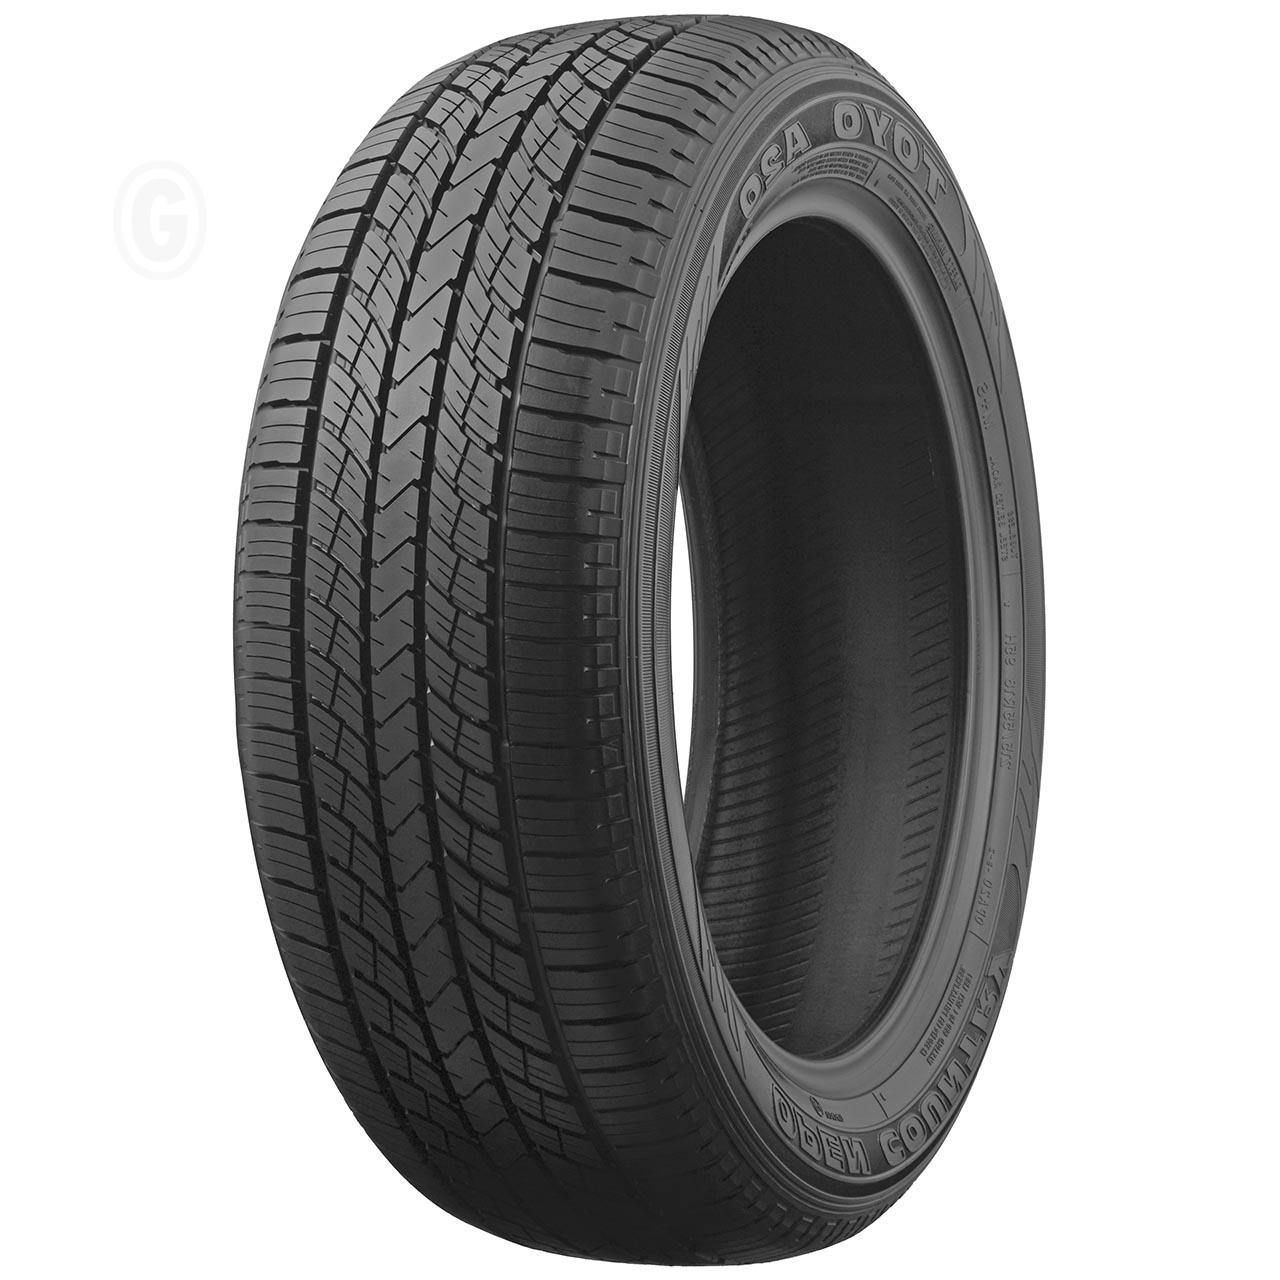 Toyo Open Country A20 215/55R18 95H M+S FSL NISSAN X-TRAIL